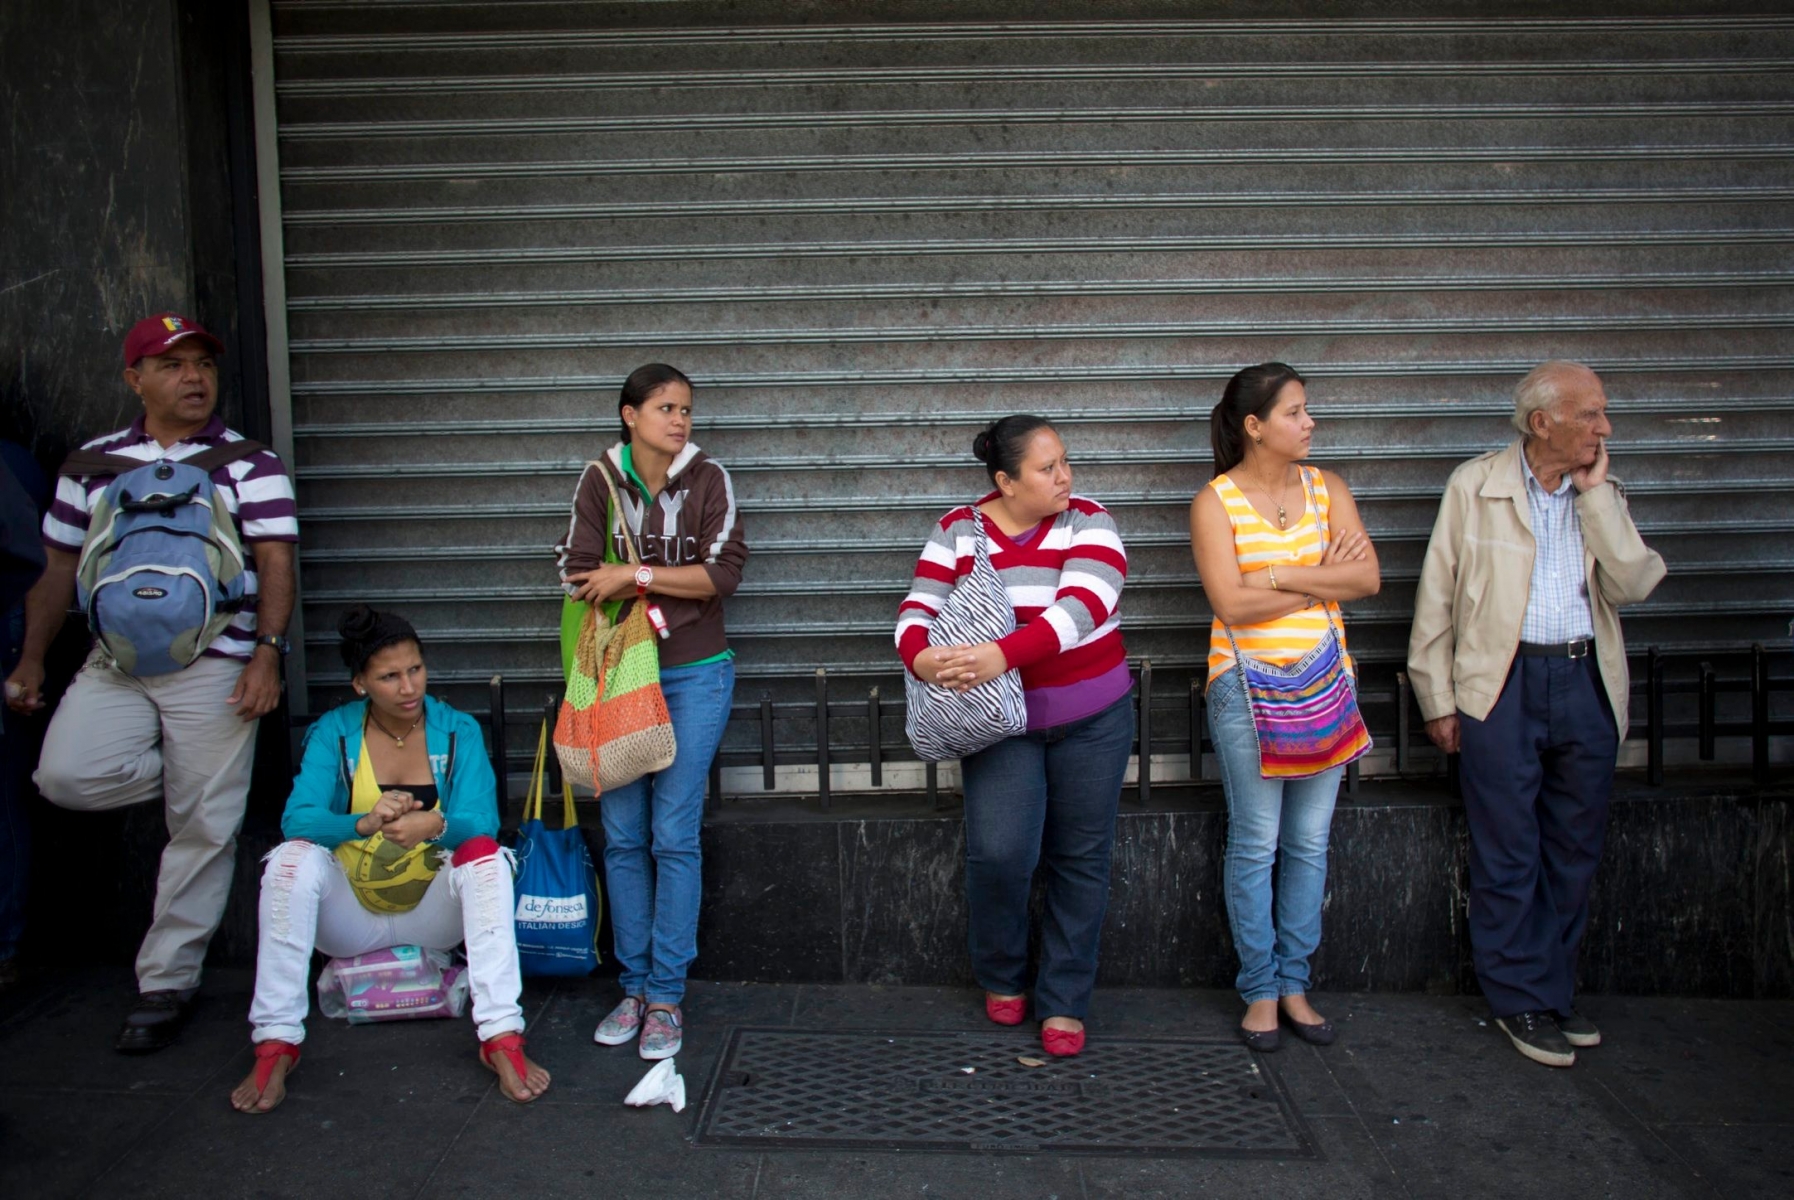 People wait in line to buy groceries at government regulated prices in Caracas, Venezuela, Wednesday, Jan. 27, 2016. There is currently a shortage of eggs and other basic foodstuffs in the country, and people wait in line for at least an hour to buy them. In a note published last Friday, the International Monetary Fund Western Hemisphere Director Alejandro Werner said inflation would more than double in the economically struggling South American country in 2016. (AP Photo/Ariana Cubillos) VENEZUELA WIRTSCHAFT NOTSTAND